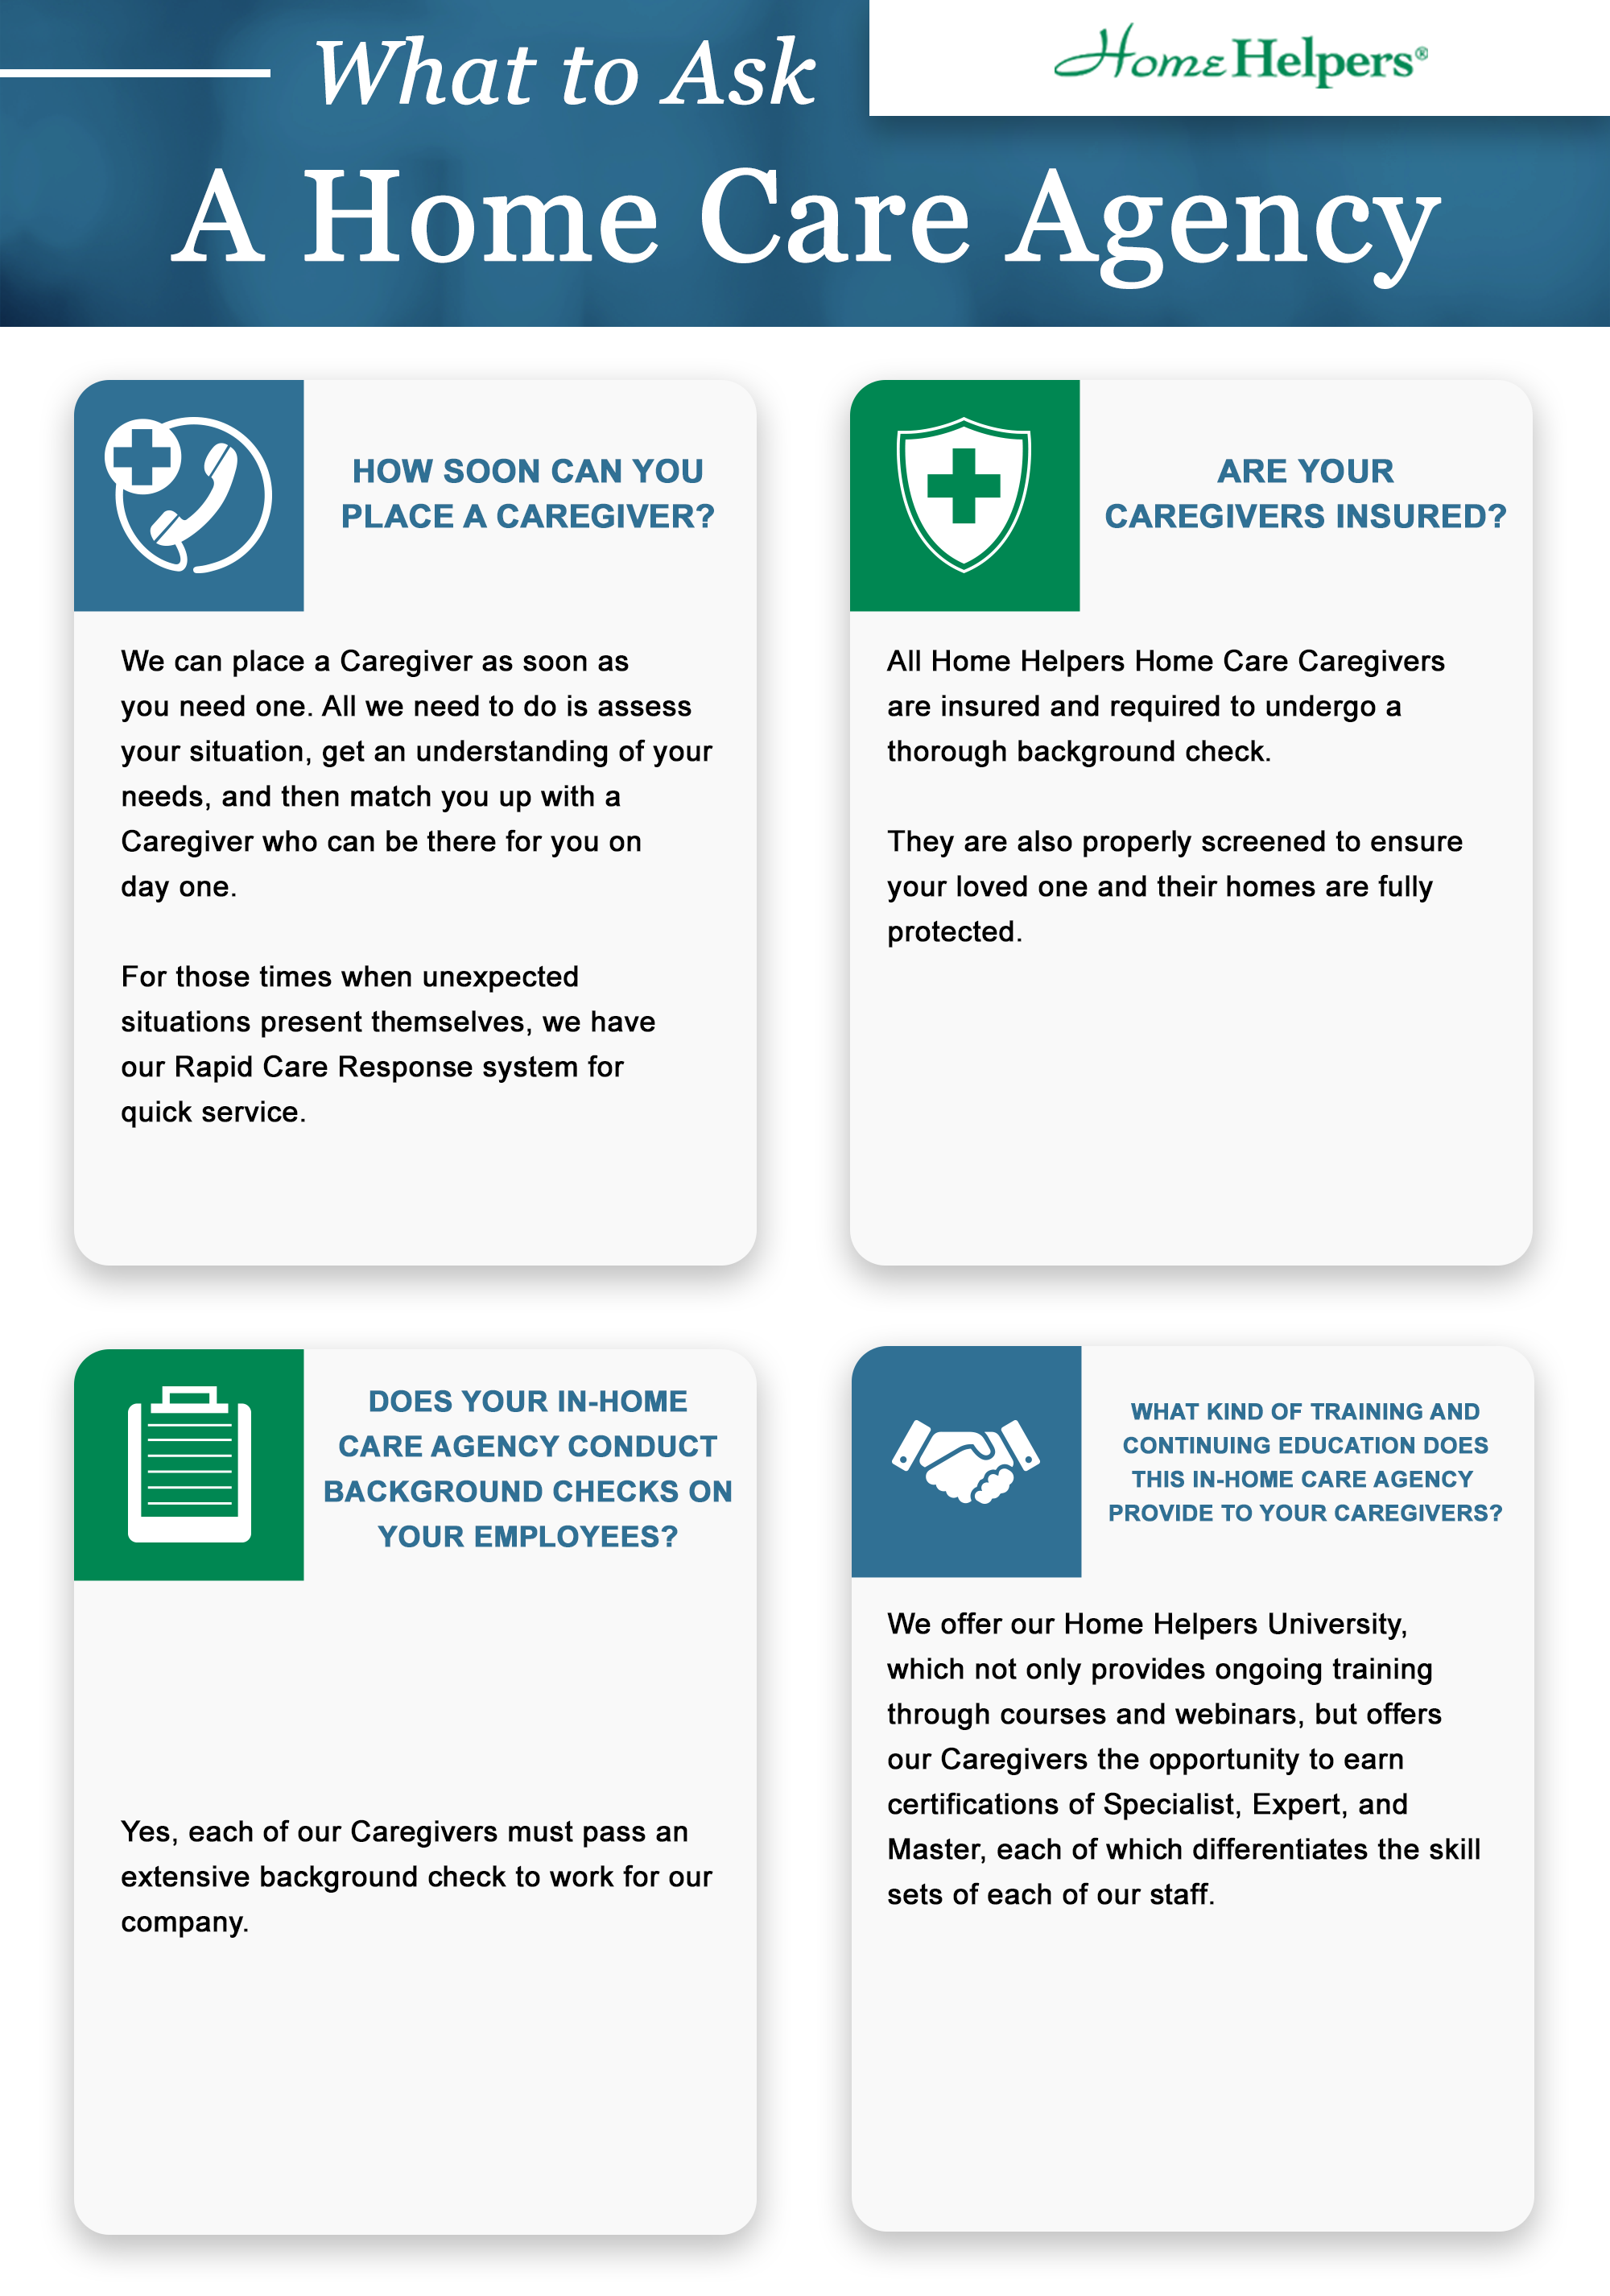 What to ask a Home Care Agency Infographic